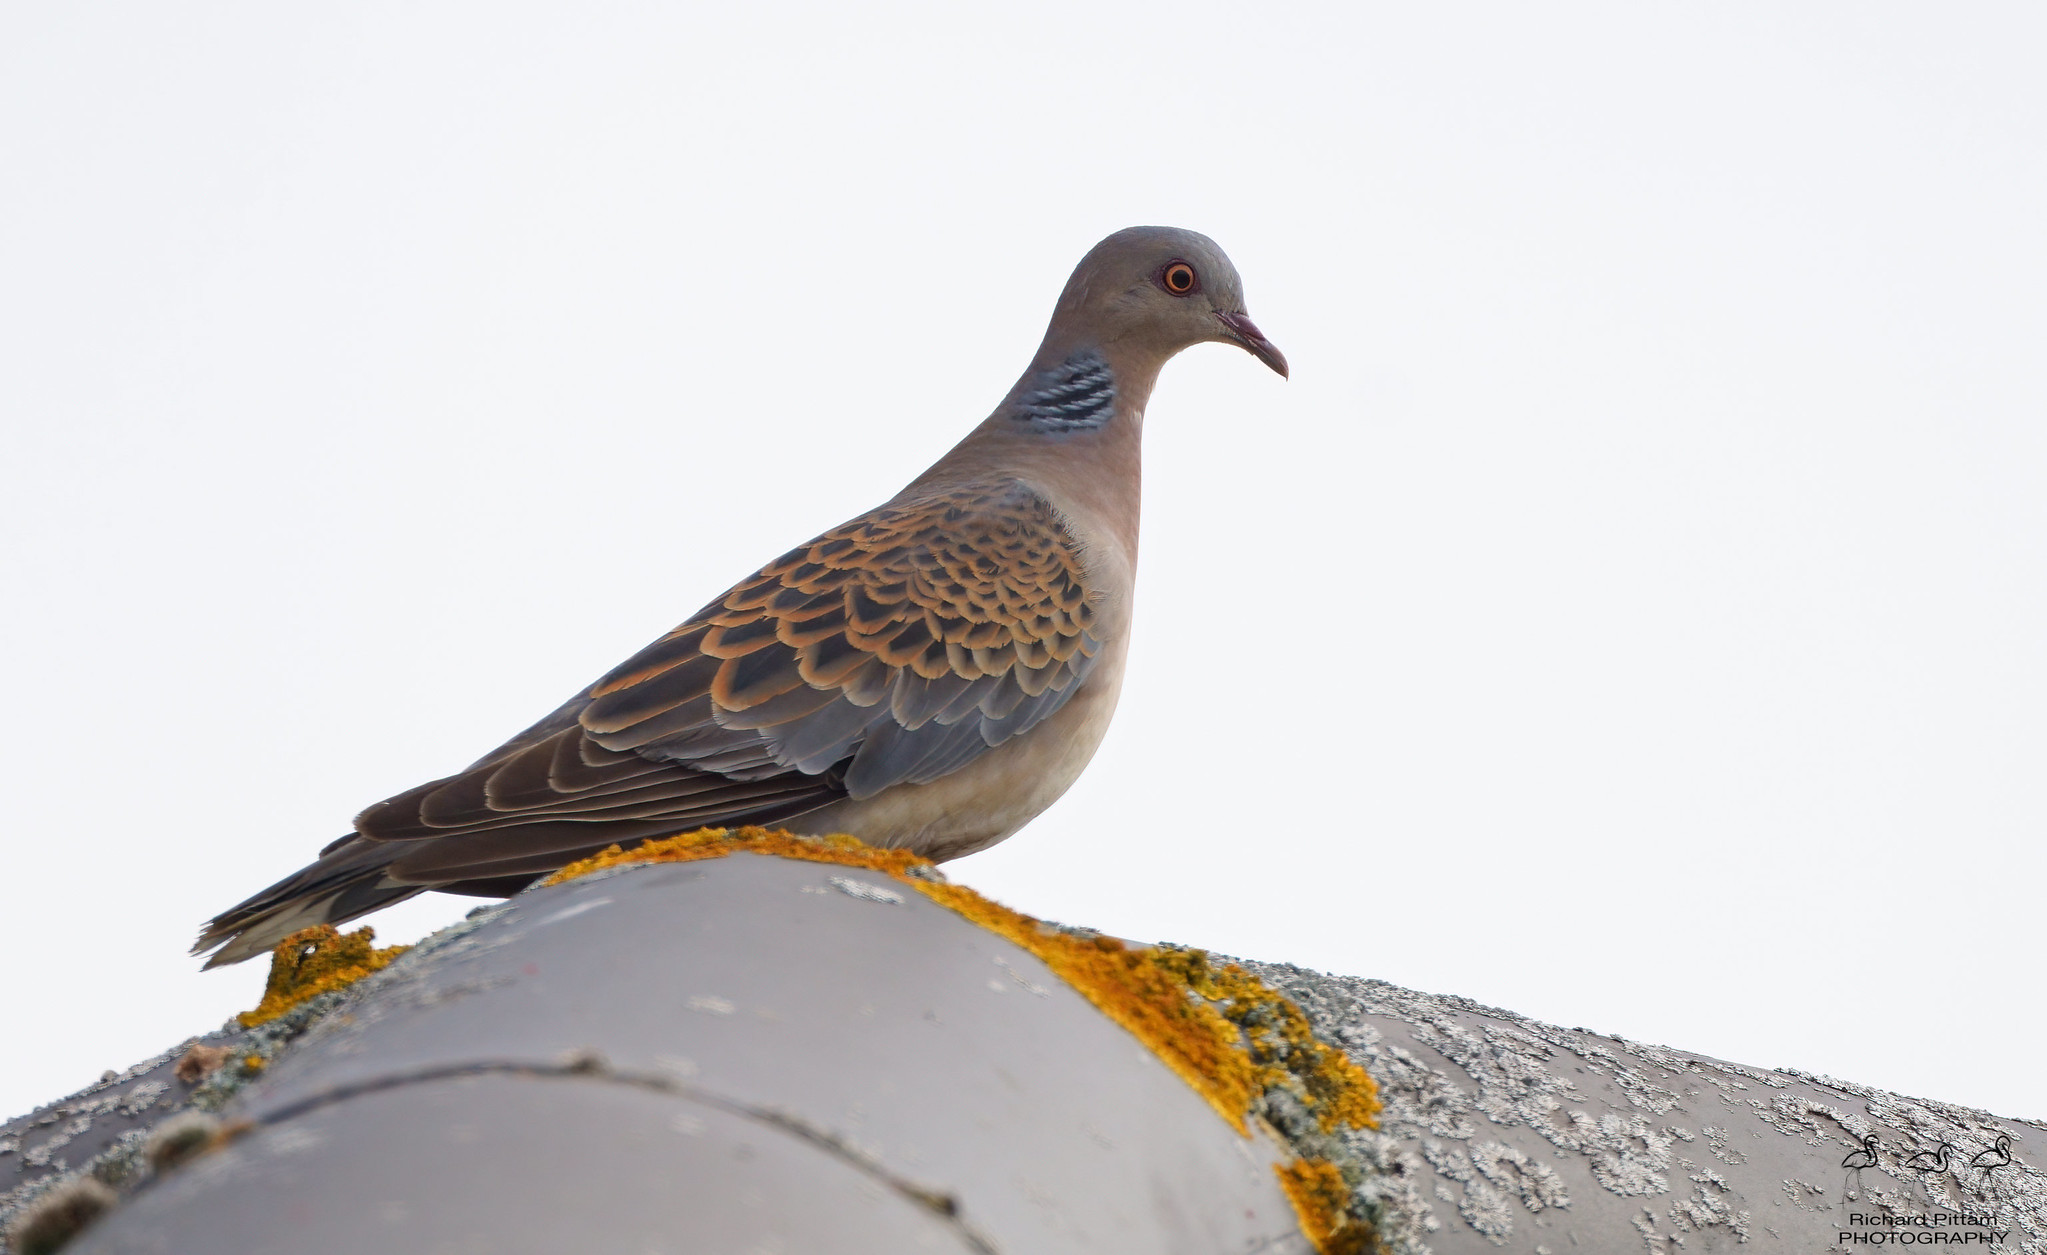 Oriental (Rufous) Turtle Dove ssp. meena - must admit I'm still not sure of differences -vs- Eurasian turtle Dove tbh.